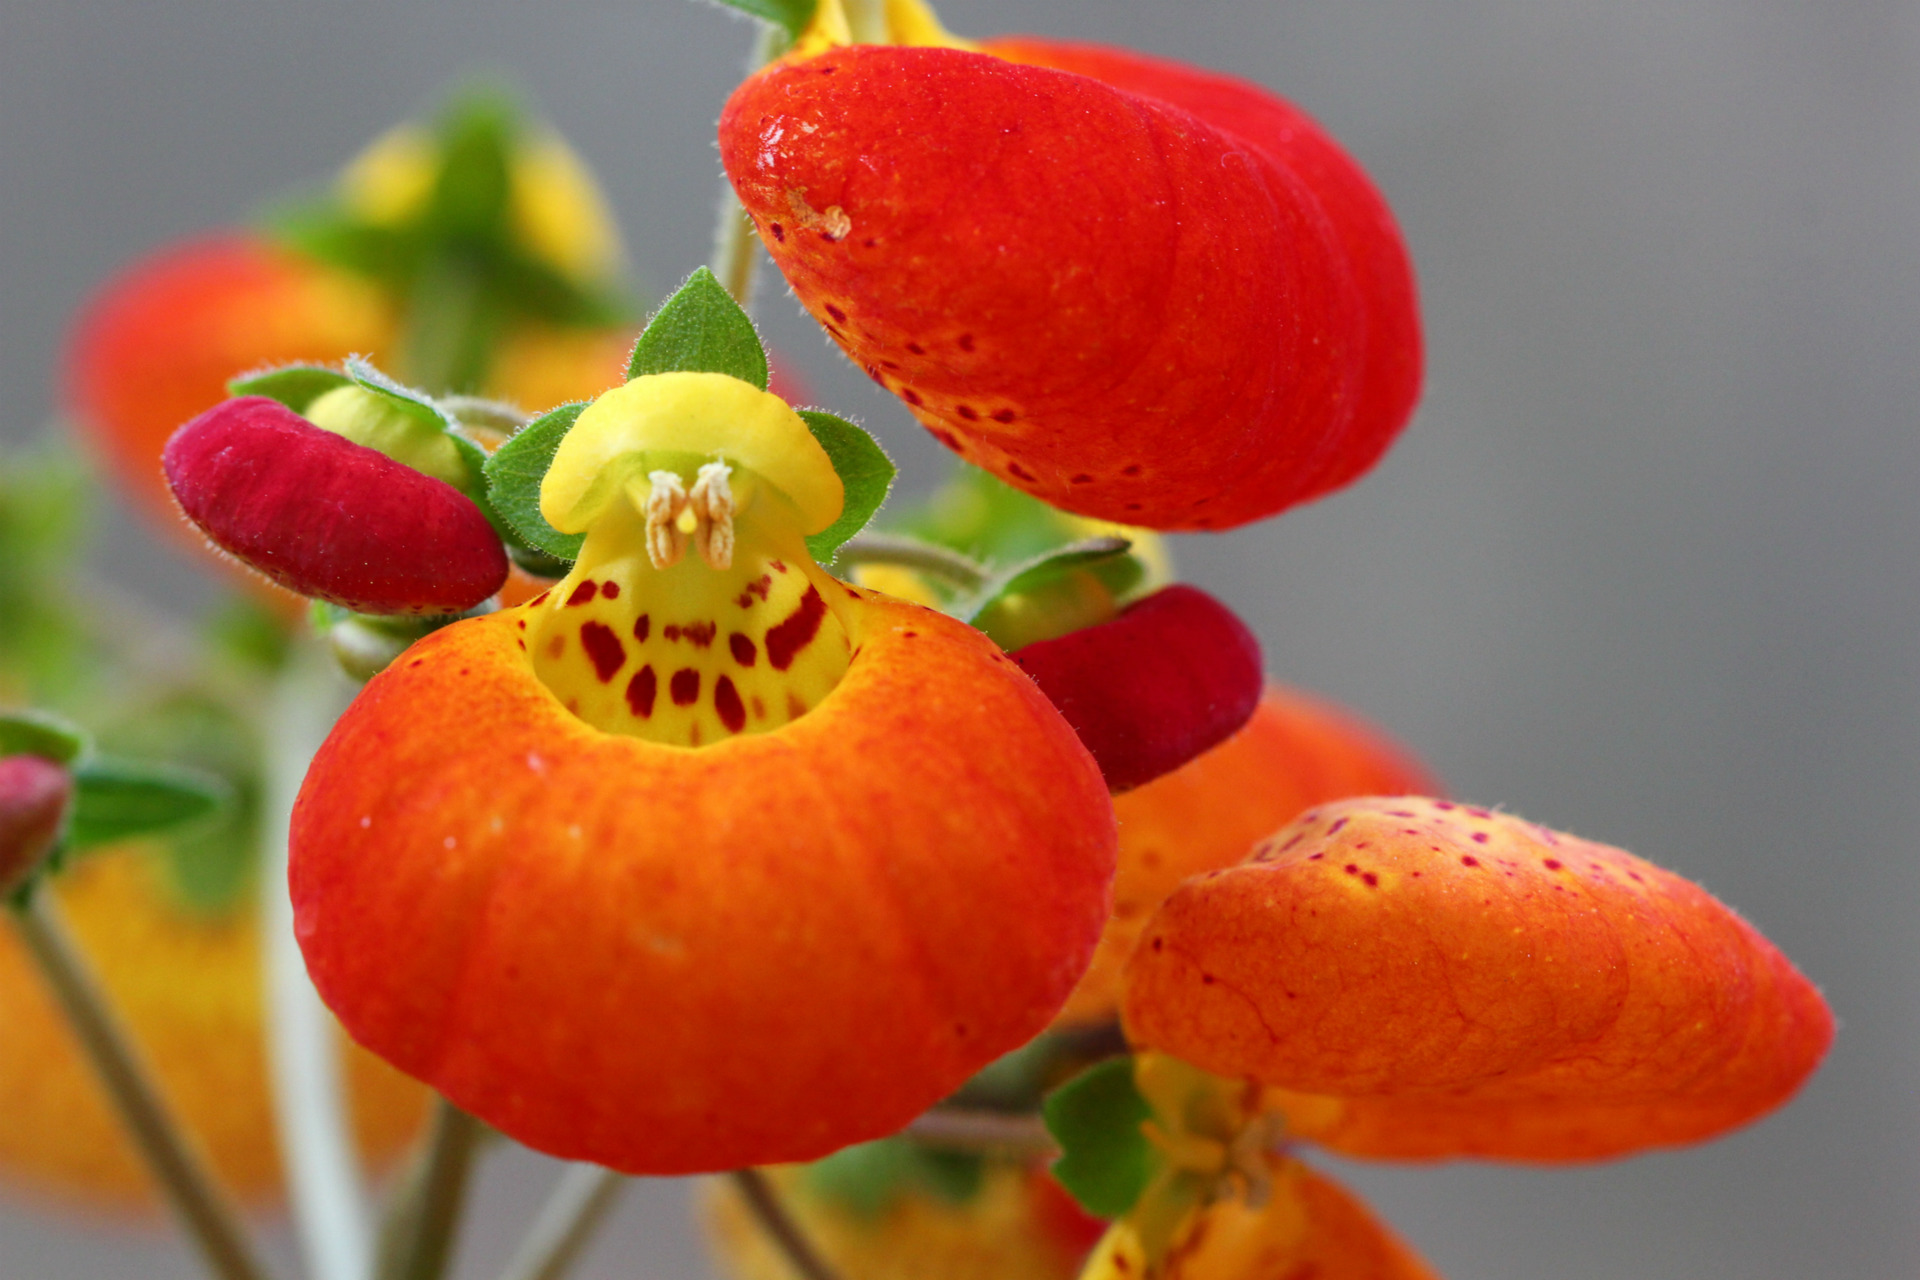 Calceolaria Ladys Purse Slipper Flower Pocketbook Flower Slipperwort With  Yellow And Orange Flowers Ornamental Hybrids For Landscape Design Delighted  Attractive Environment Stock Photo - Download Image Now - iStock